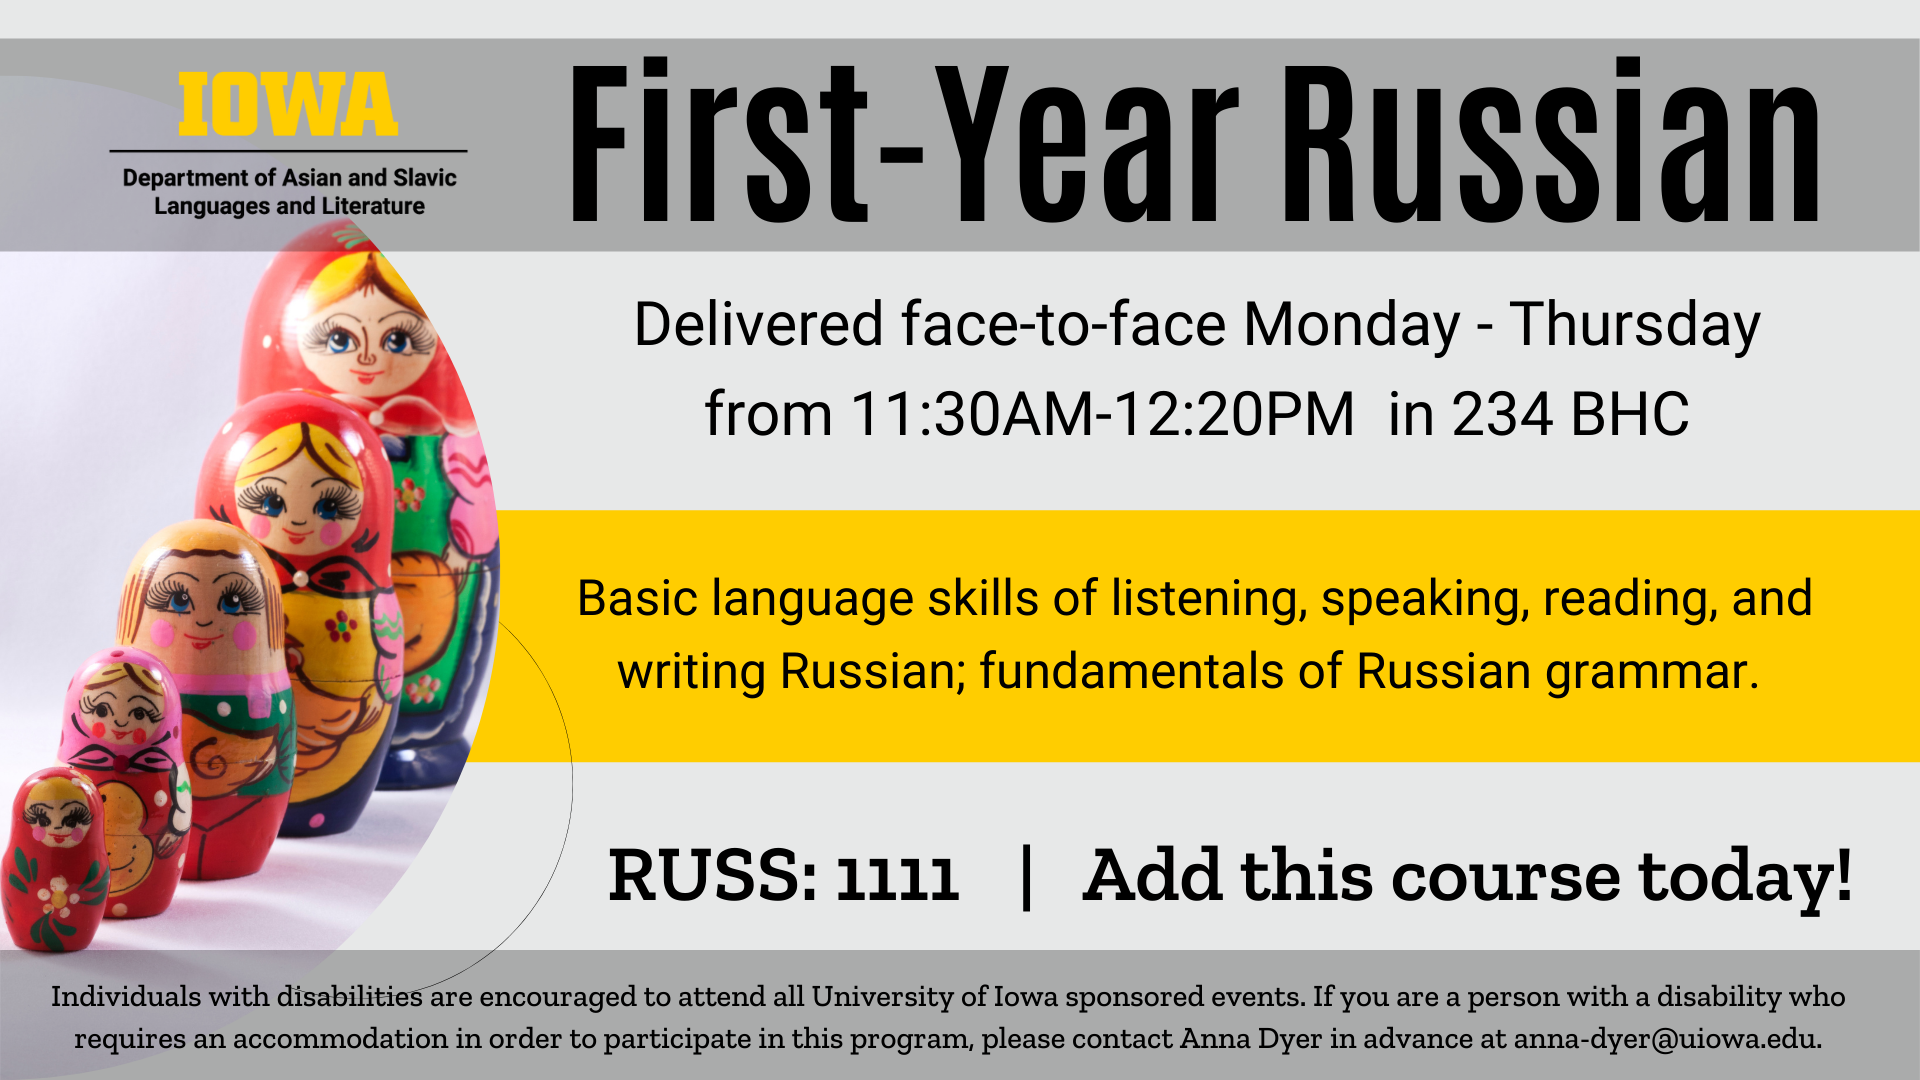 First-Year Russian Delivered face-to-face Monday through Thursday from 11:30AM-12:20PM  in 234 BHC Basic language skills of listening, speaking, reading, and writing Russian; fundamentals of Russian grammar. RUSS 1111 Add this course today! Individuals with disabilities are encouraged to attend all University of Iowa sponsored events. If you are a person with a disability who requires an accommodation in order to participate in this program, please contact Anna Dyer in advance at anna-dyer@uiowa.edu.